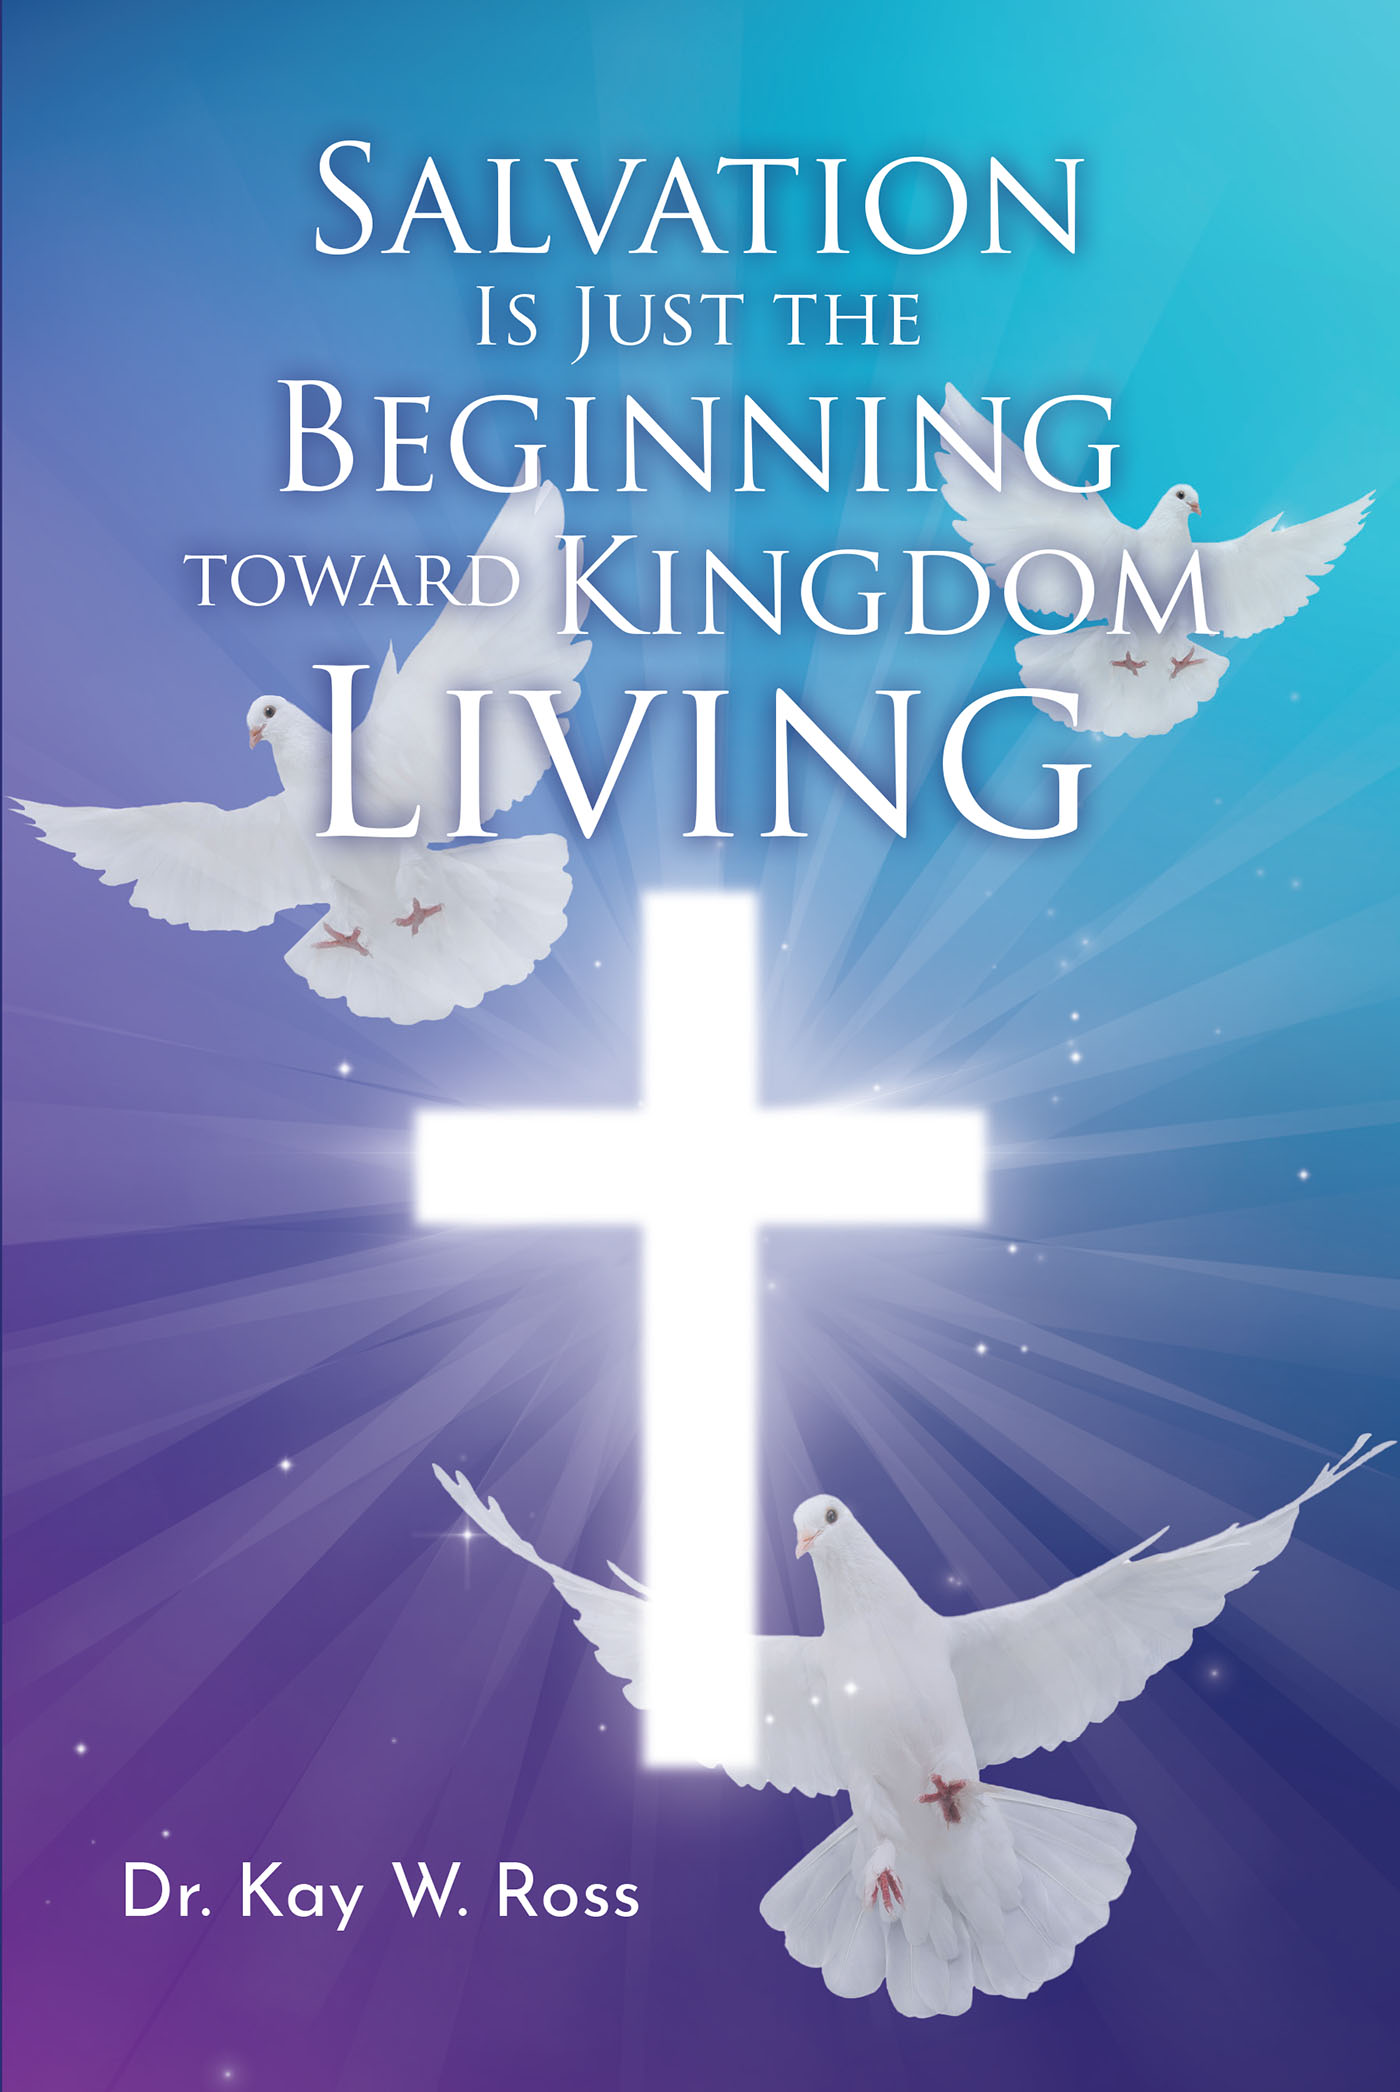 Dr. Kay W. Ross’s Newly Released "Salvation is Just the Beginning Toward Kingdom Living" is a Heartfelt Message of Encouragement for New Believers